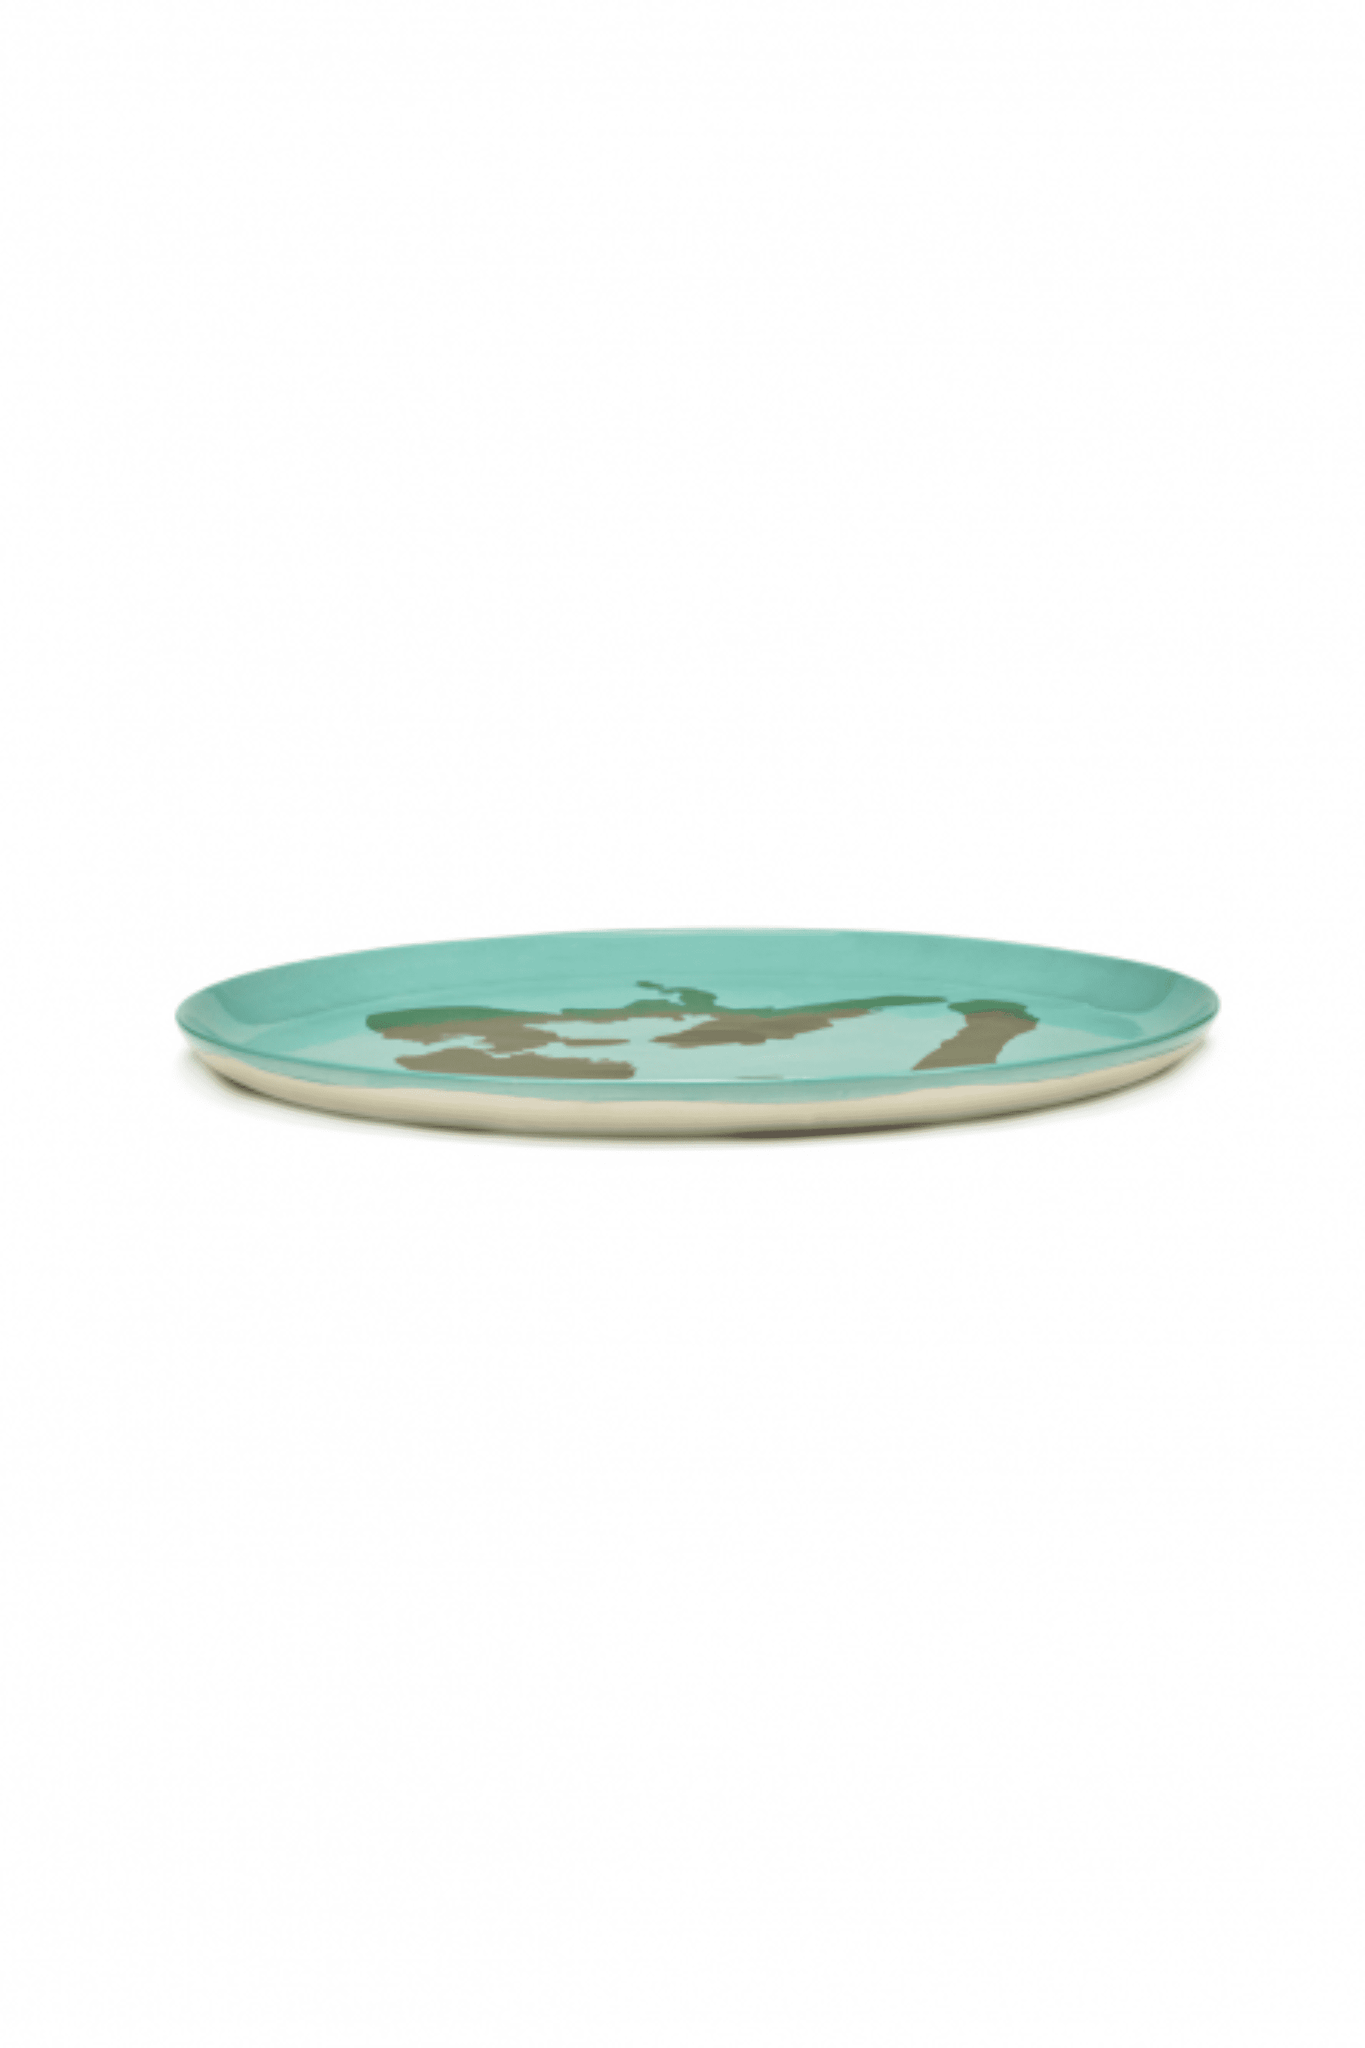 Serving Plate, Azure with Gold Pepper Ottolenghi Serax, front view